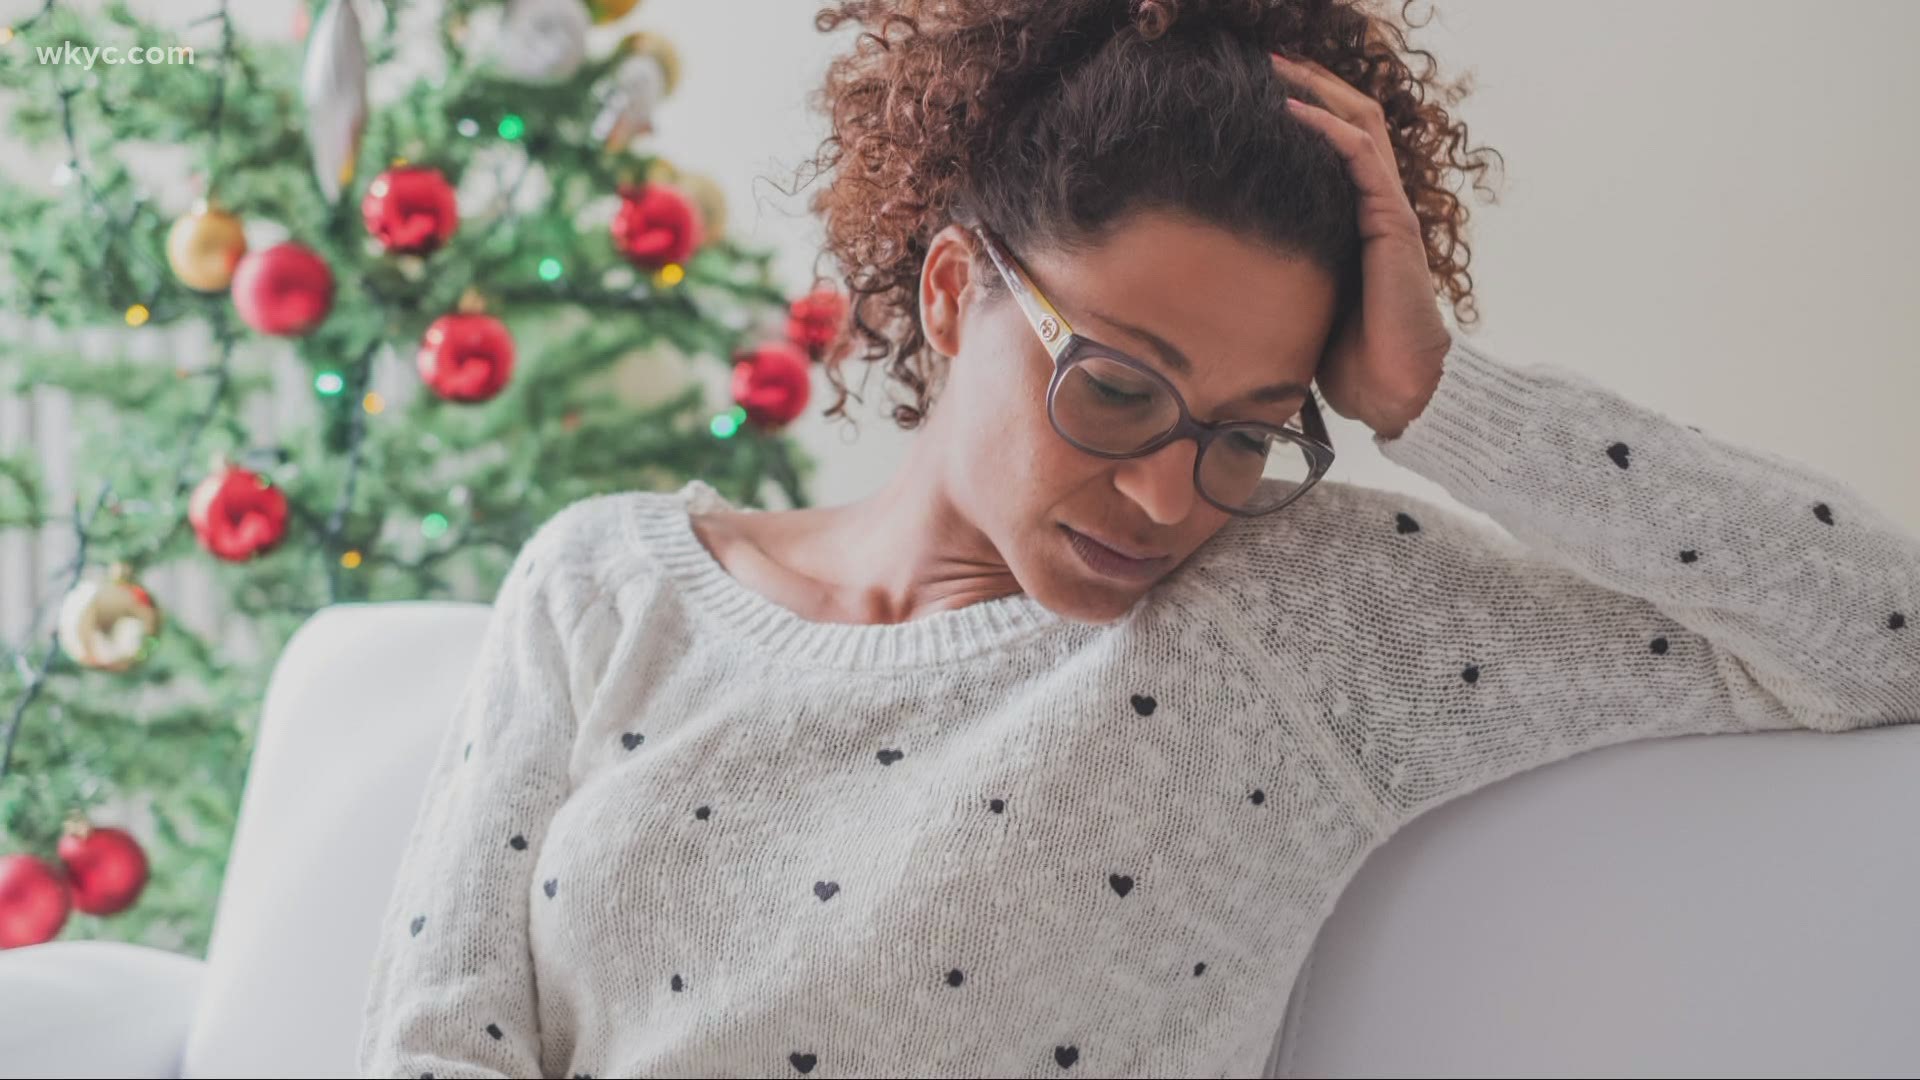 Feeling overwhelmed this holiday season? We talked with an expert on how to get through the burnout this year amid the COVID-19 pandemic.